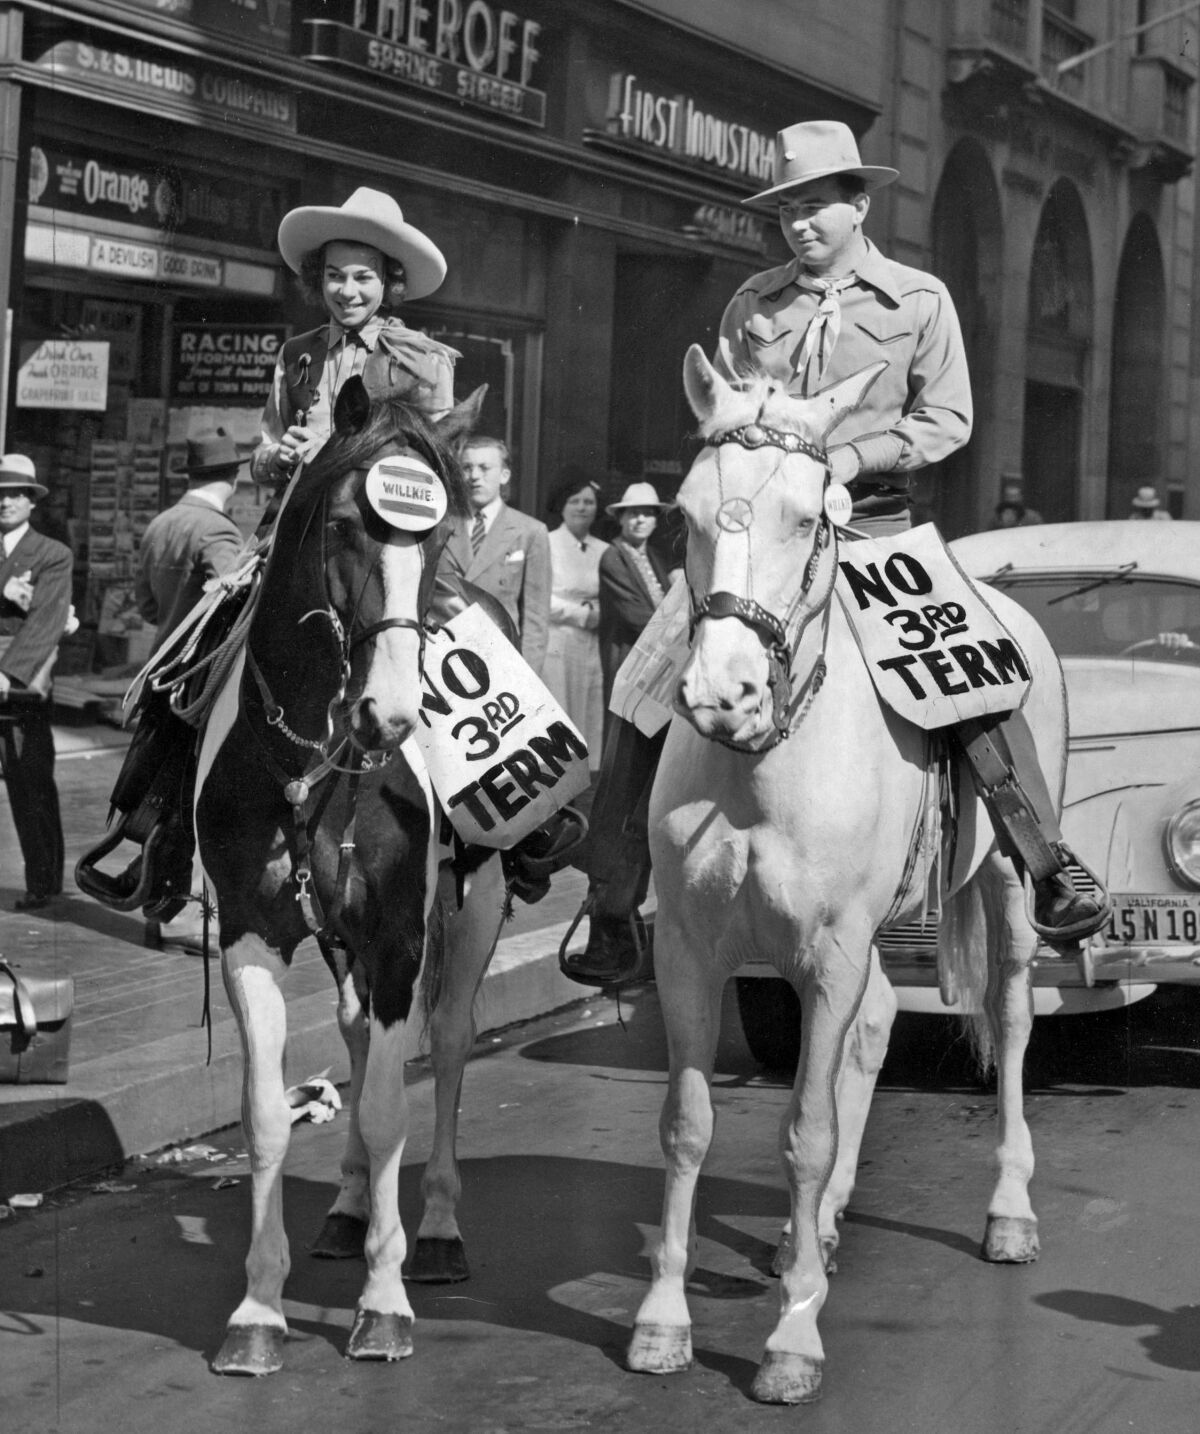 Oct. 23, 1940: Frances Voltz and Les Sachs ride down Spring Street during "No Third Term Day" observances in Los Angeles.